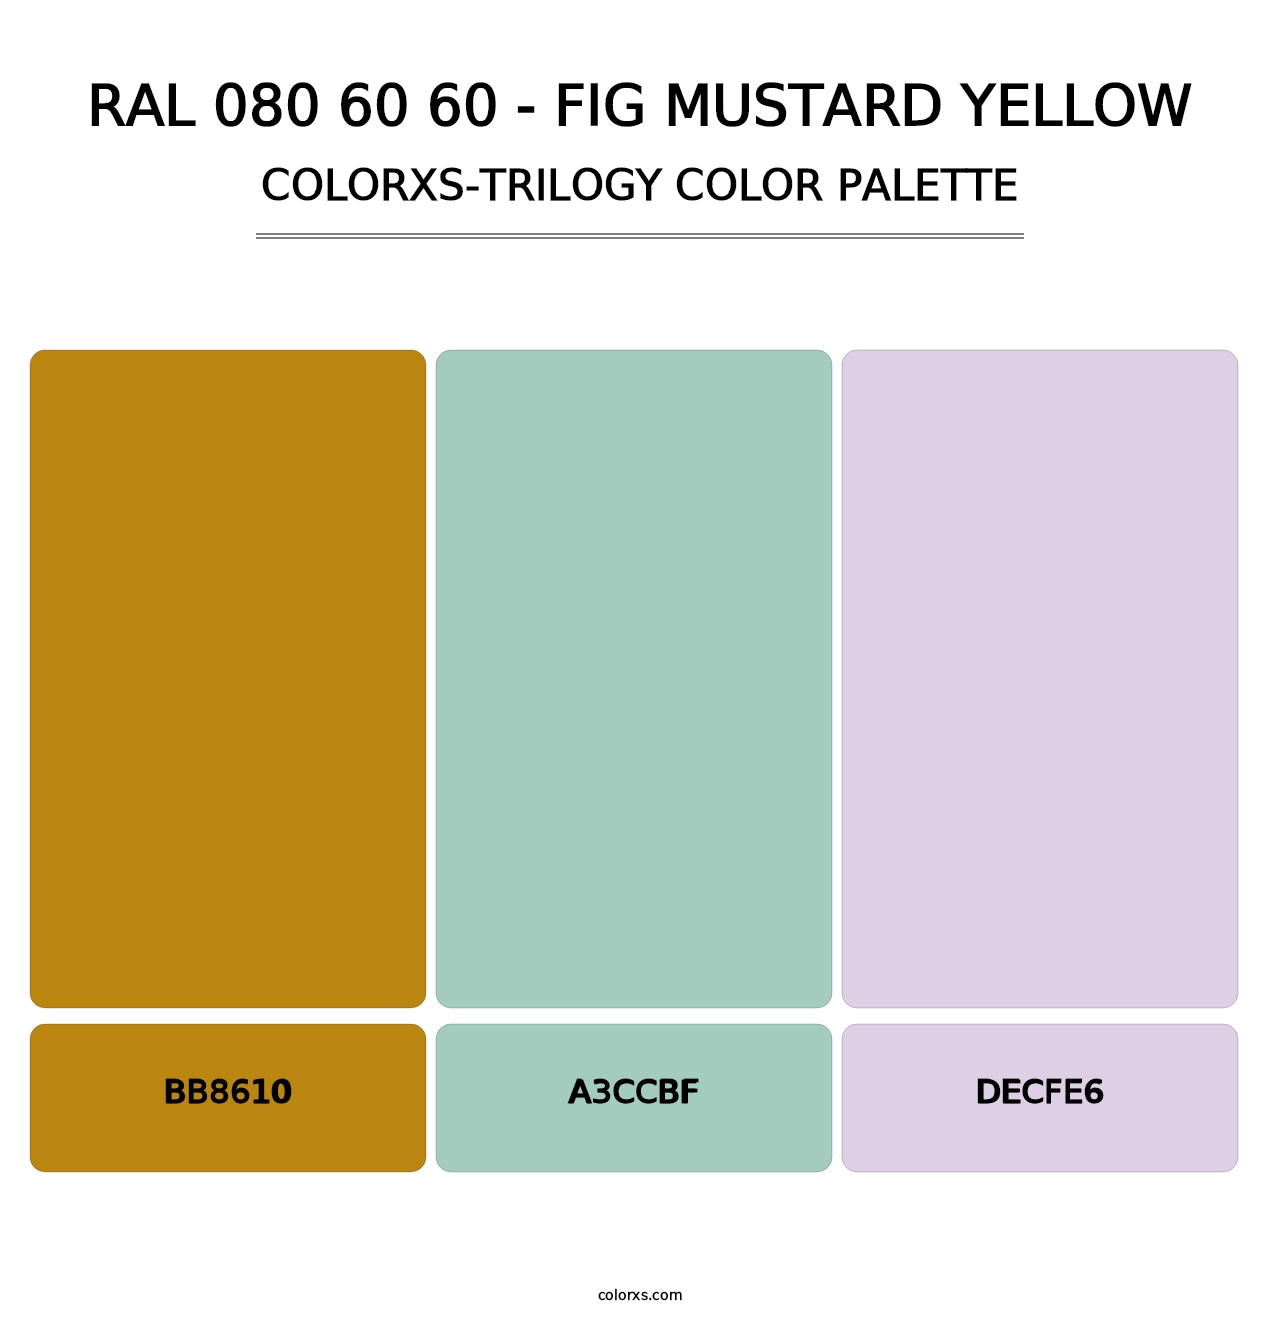 RAL 080 60 60 - Fig Mustard Yellow - Colorxs Trilogy Palette